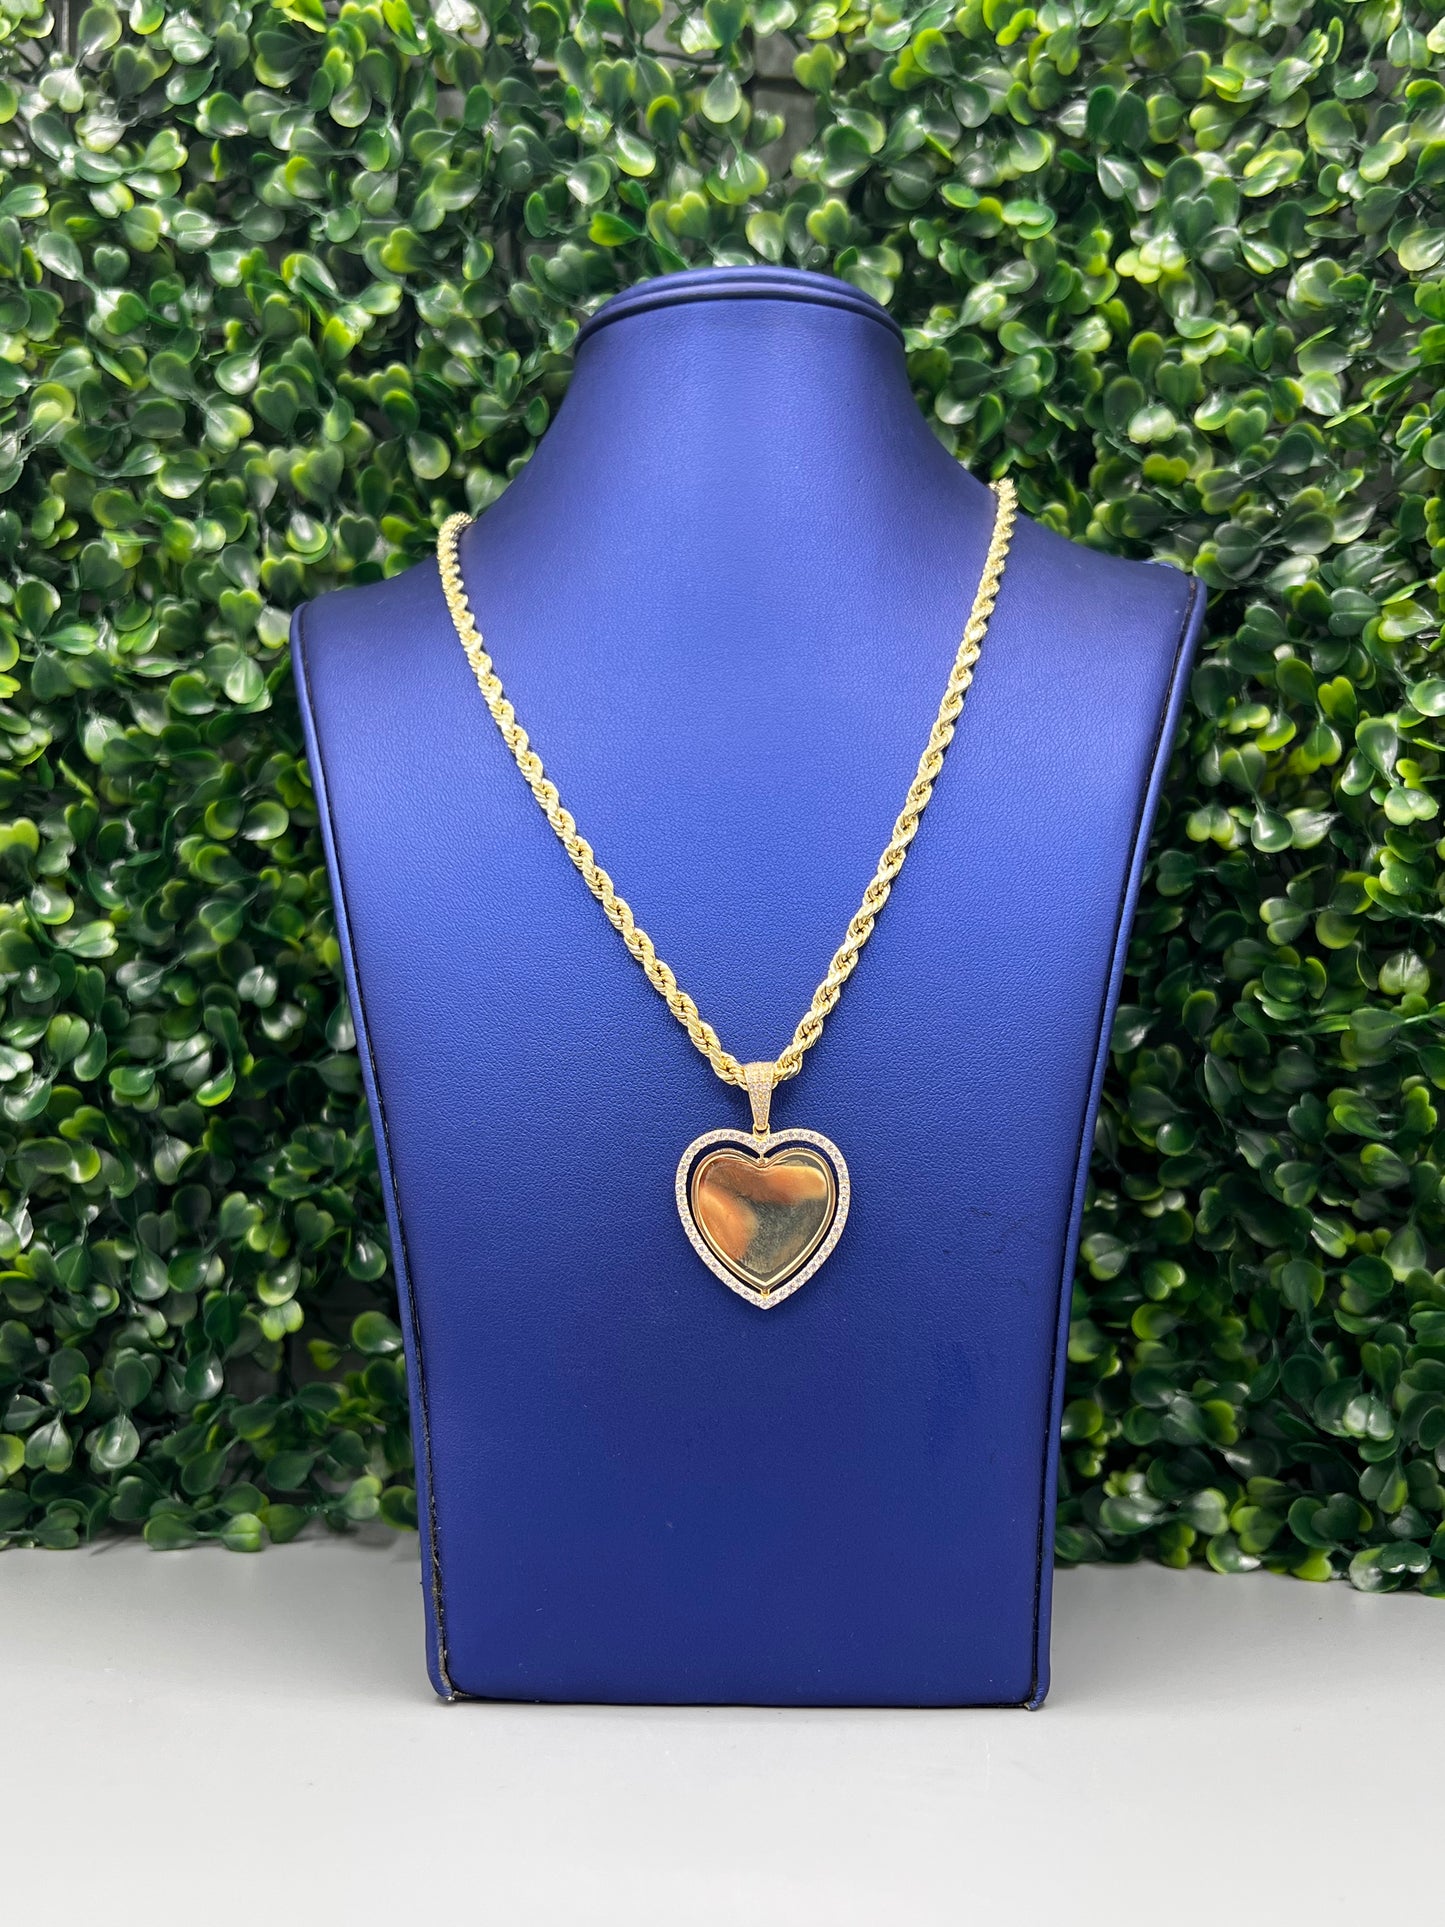 New 14K Heart ❤️ Picture Pendant Double Sided + Rope Chain by GDO